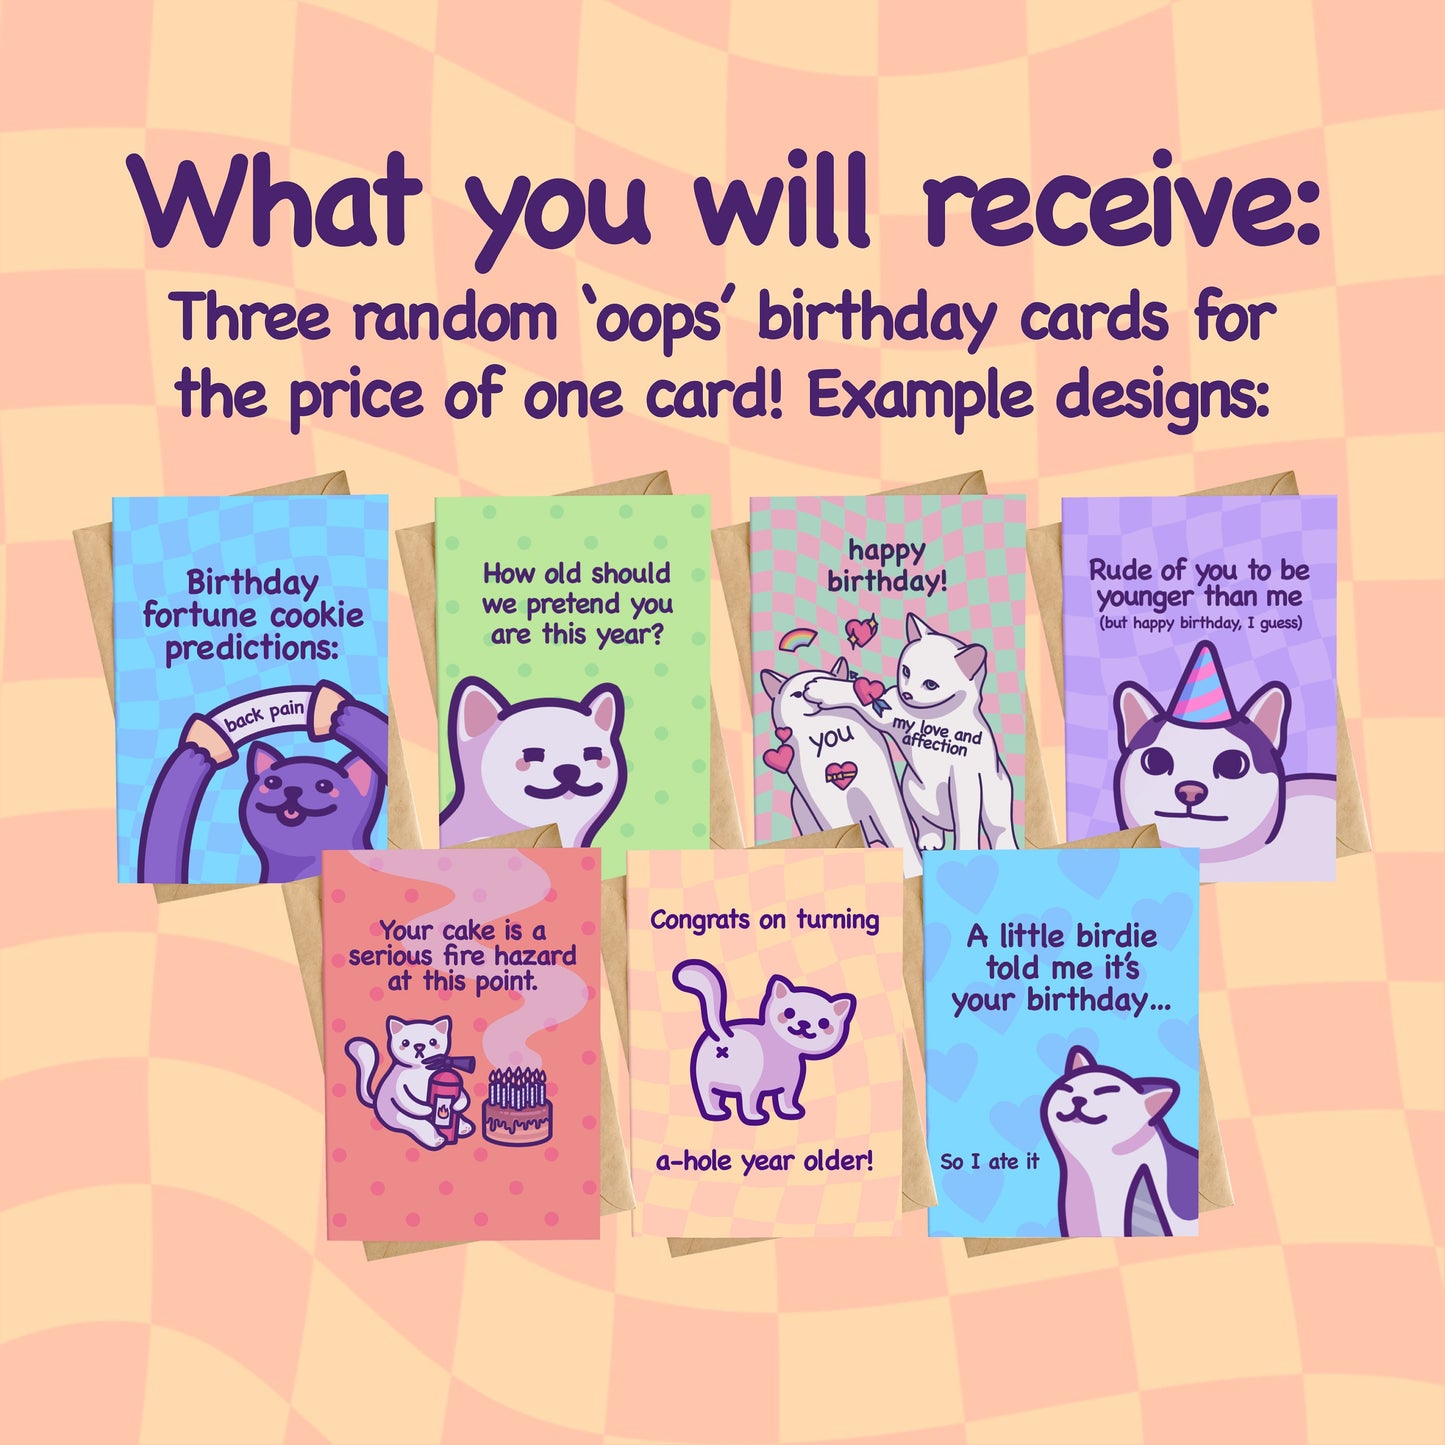 Oops Mystery Birthday Card Pack | B-Grade Greeting Cards | Funny & Cute Cat Meme Birthday Cards | Random Discounted Grab Bags